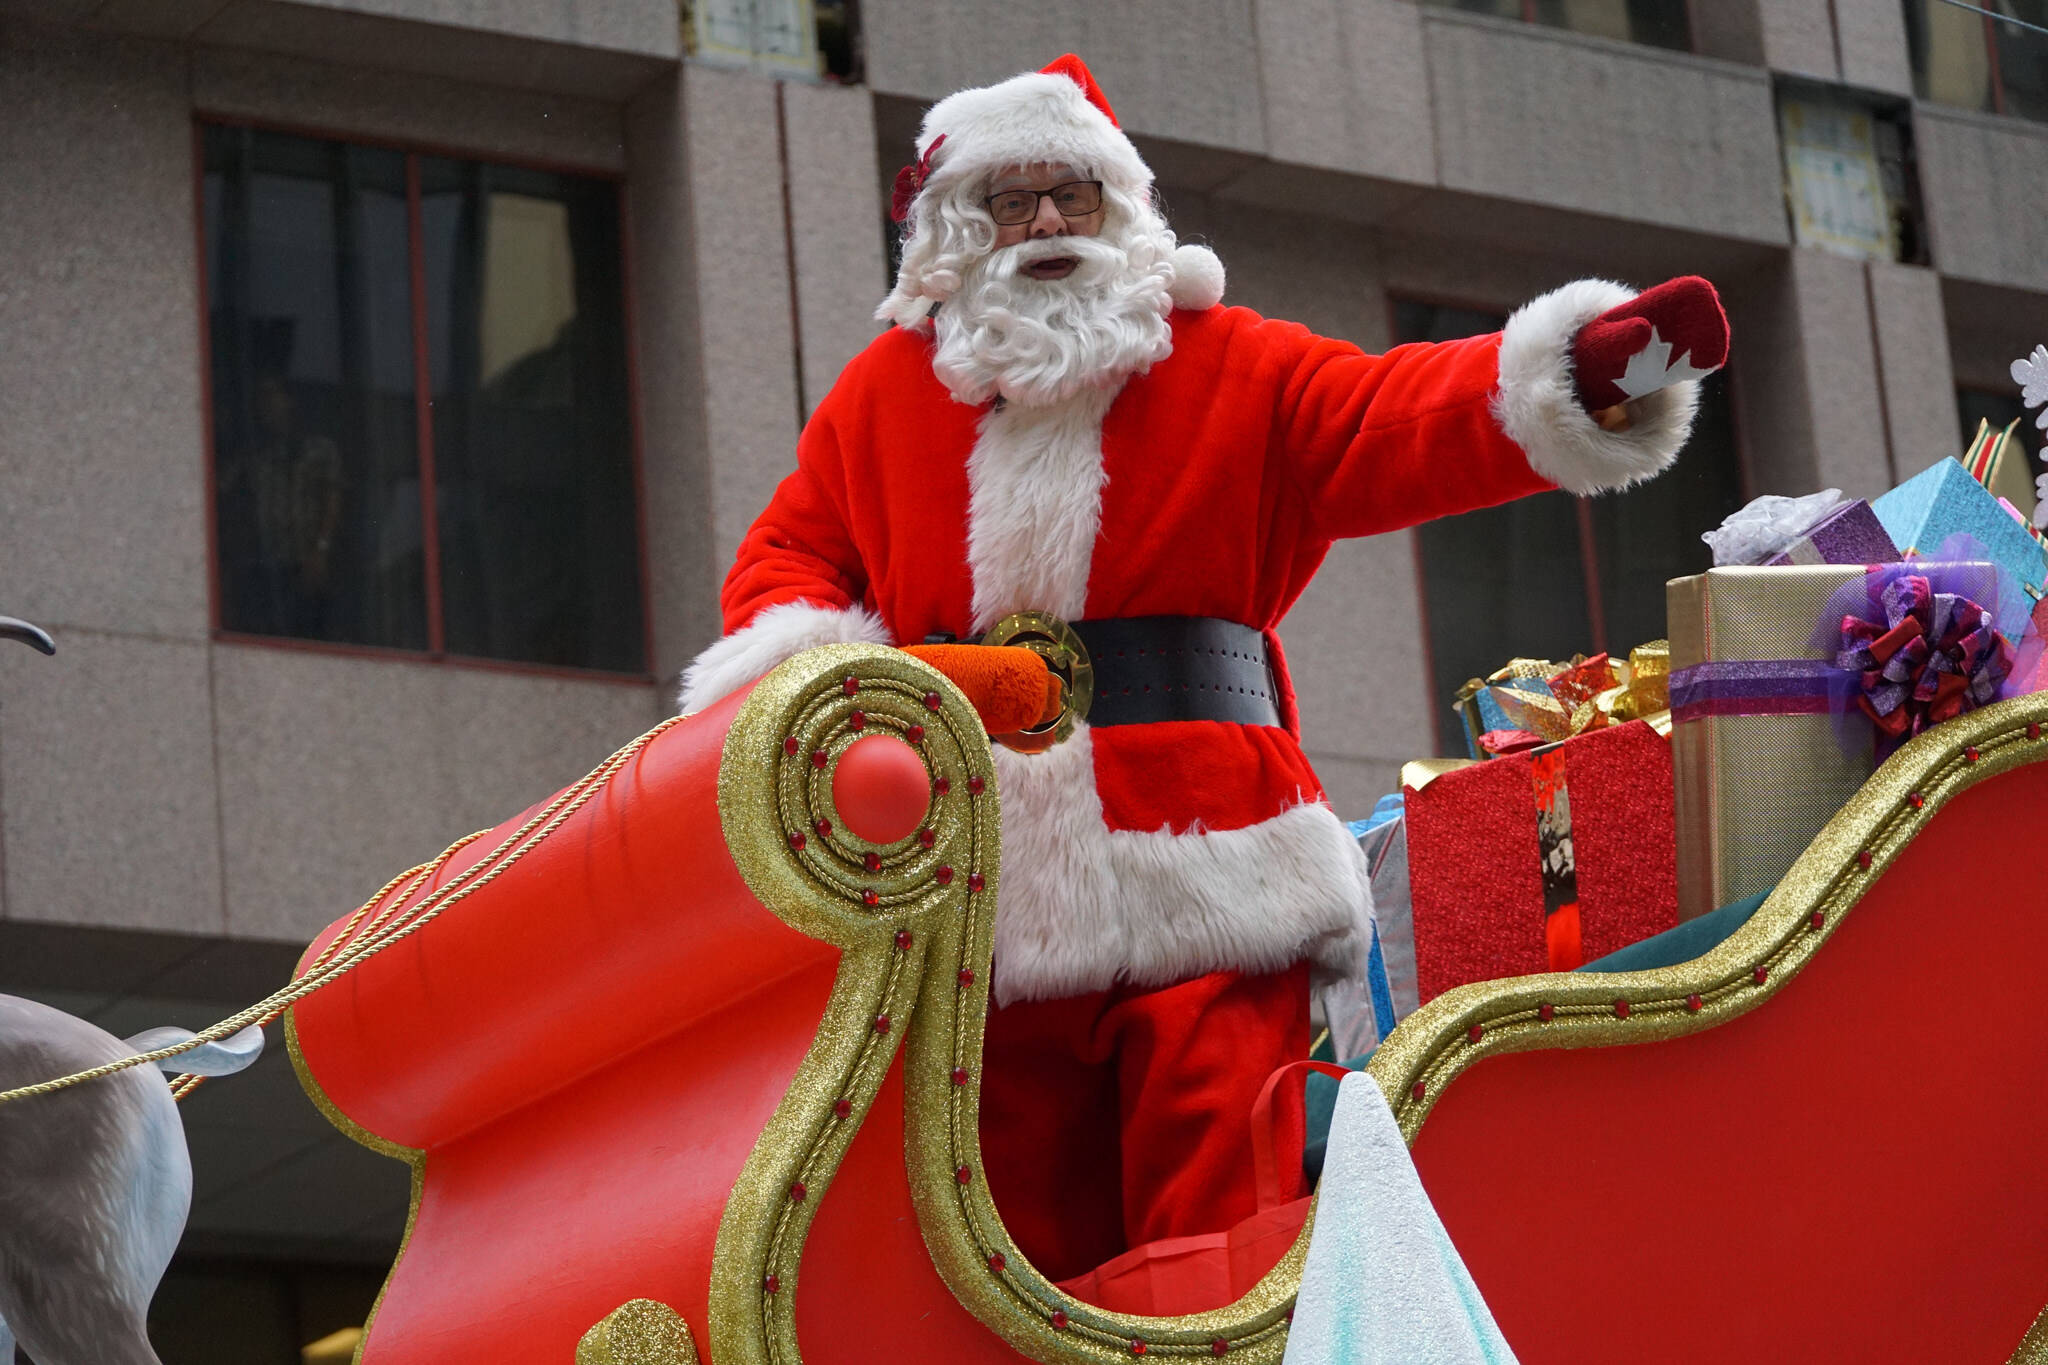 Santa Claus Parade route and road closures in Toronto for 2018